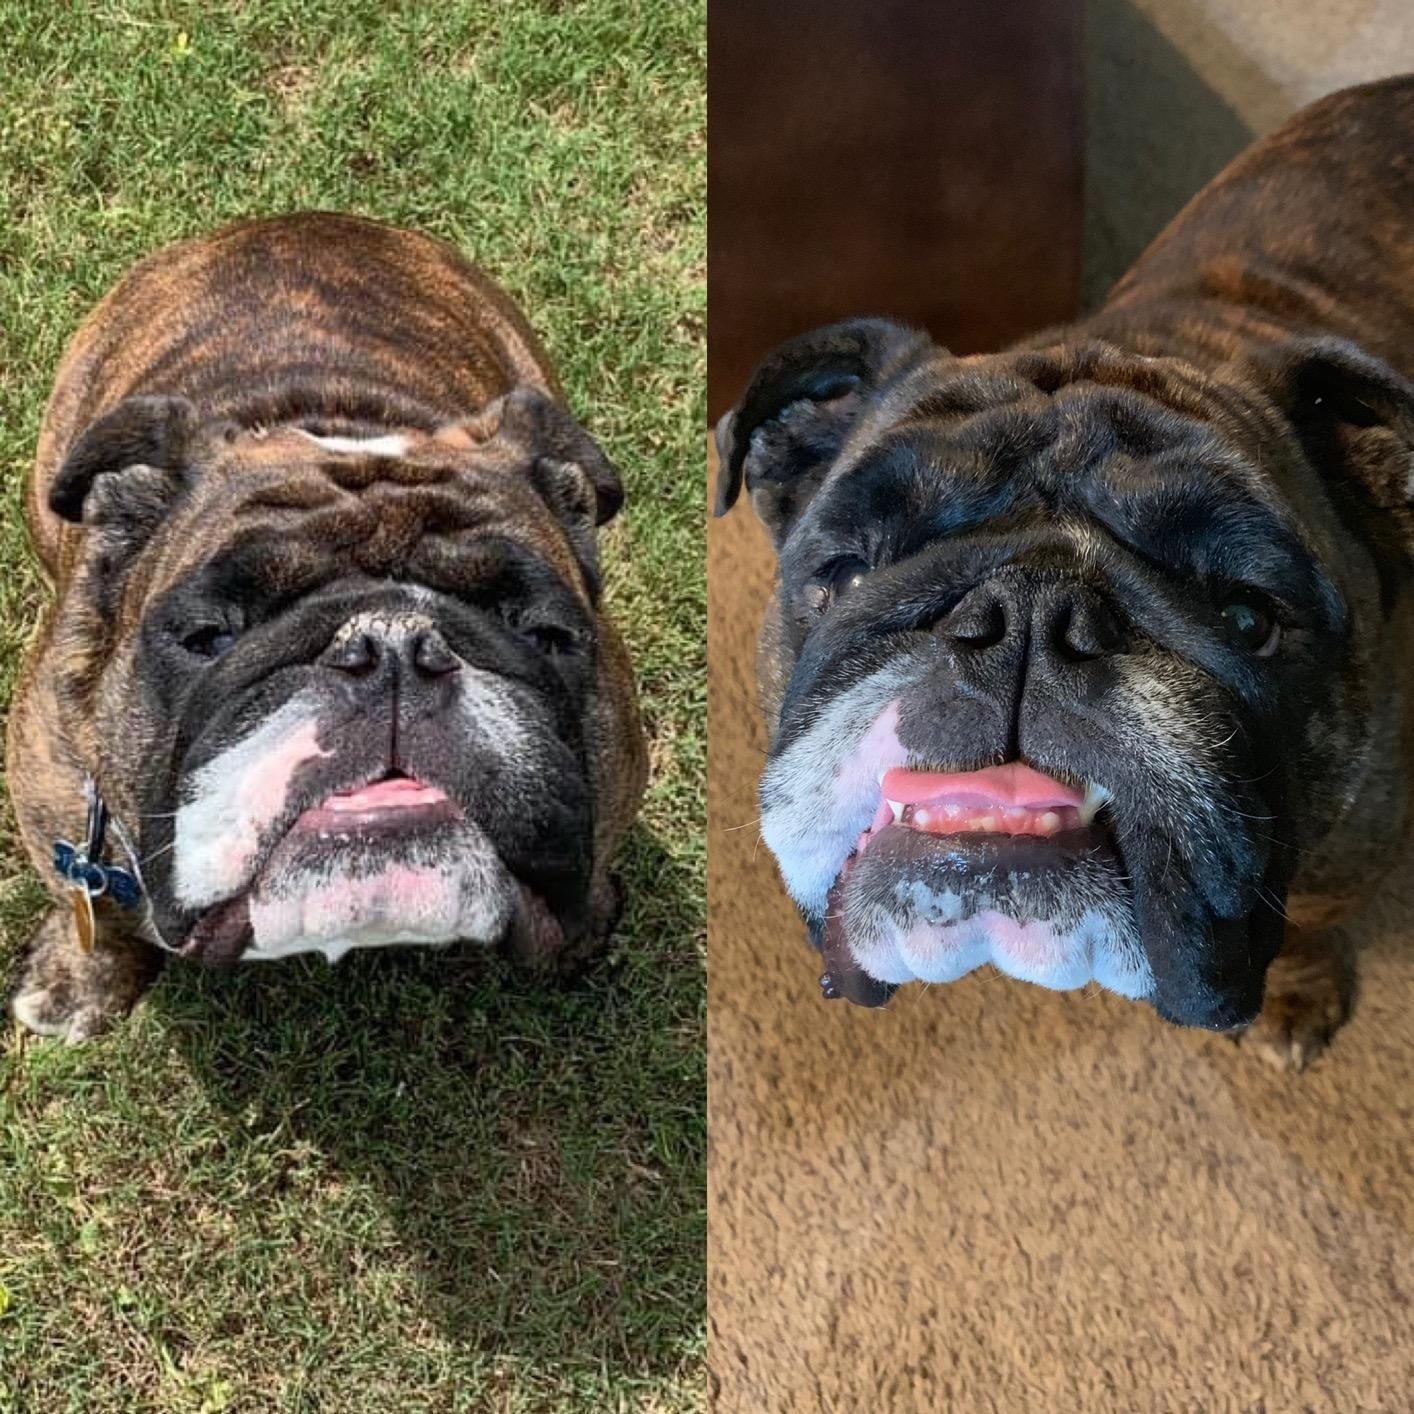 on left: bulldog with crusty snout. on right, same bulldog with clearer snout after using the soothing stick